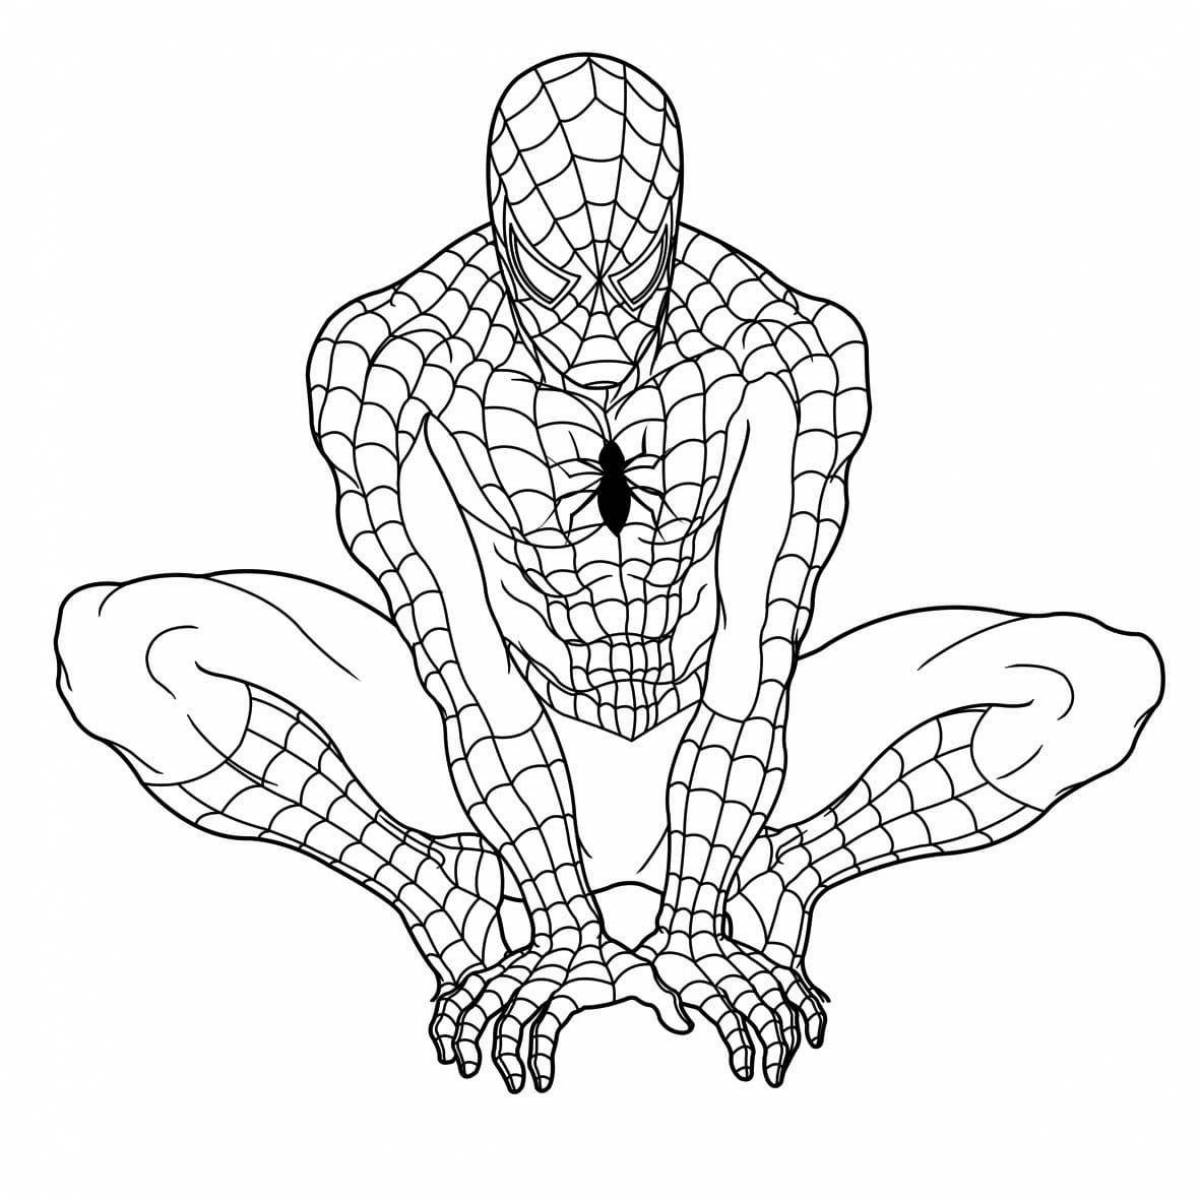 Humble Spiderman coloring page